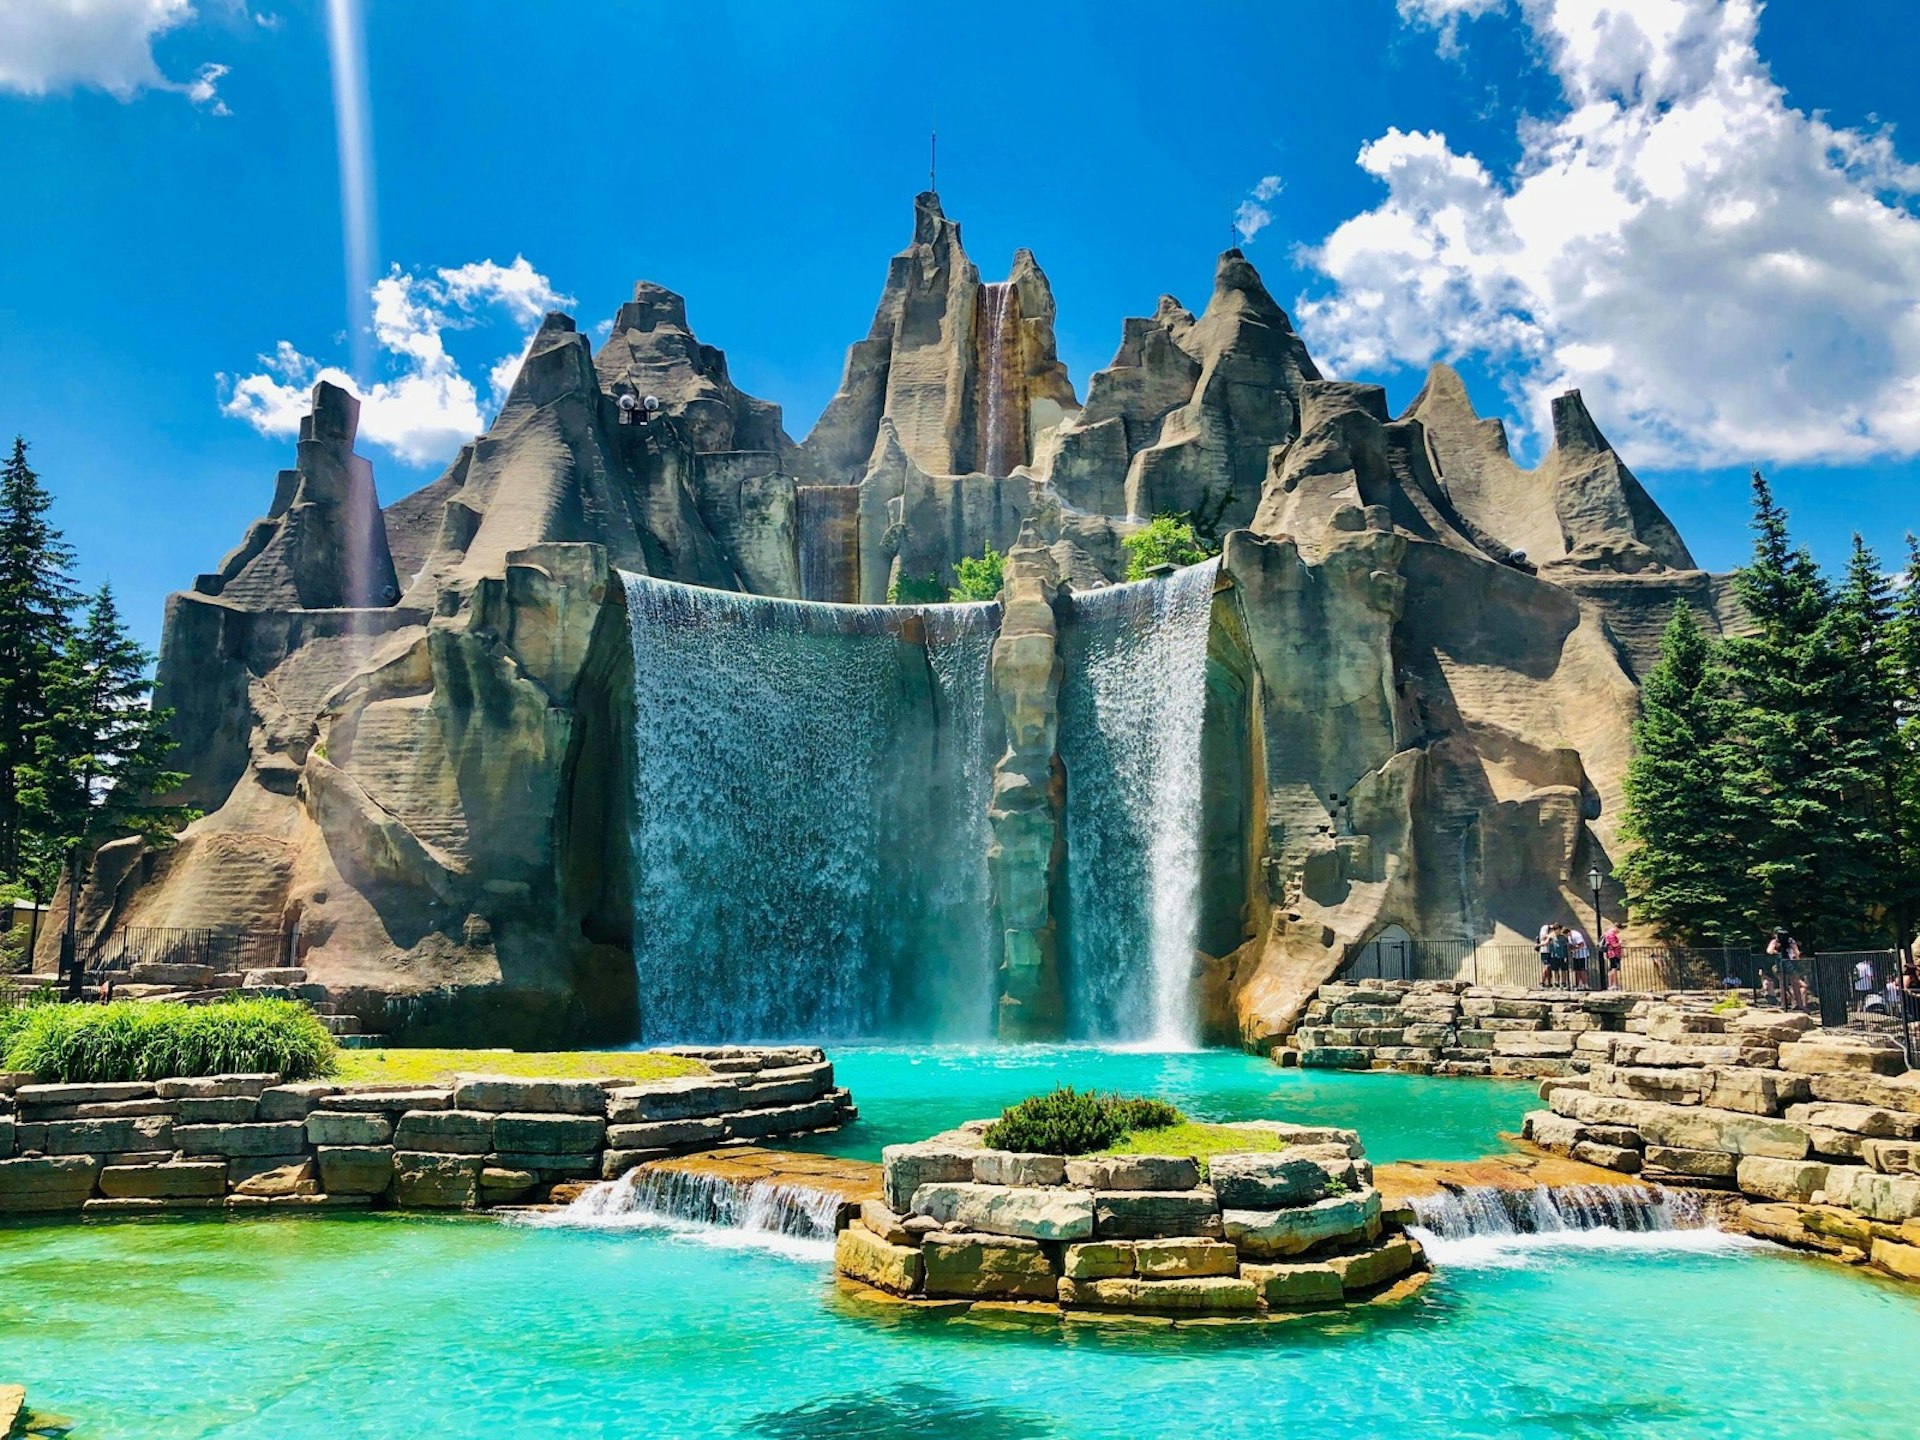 A large waterfall pools into a large man-made stone enclosed structure; North America's top amusement parks  